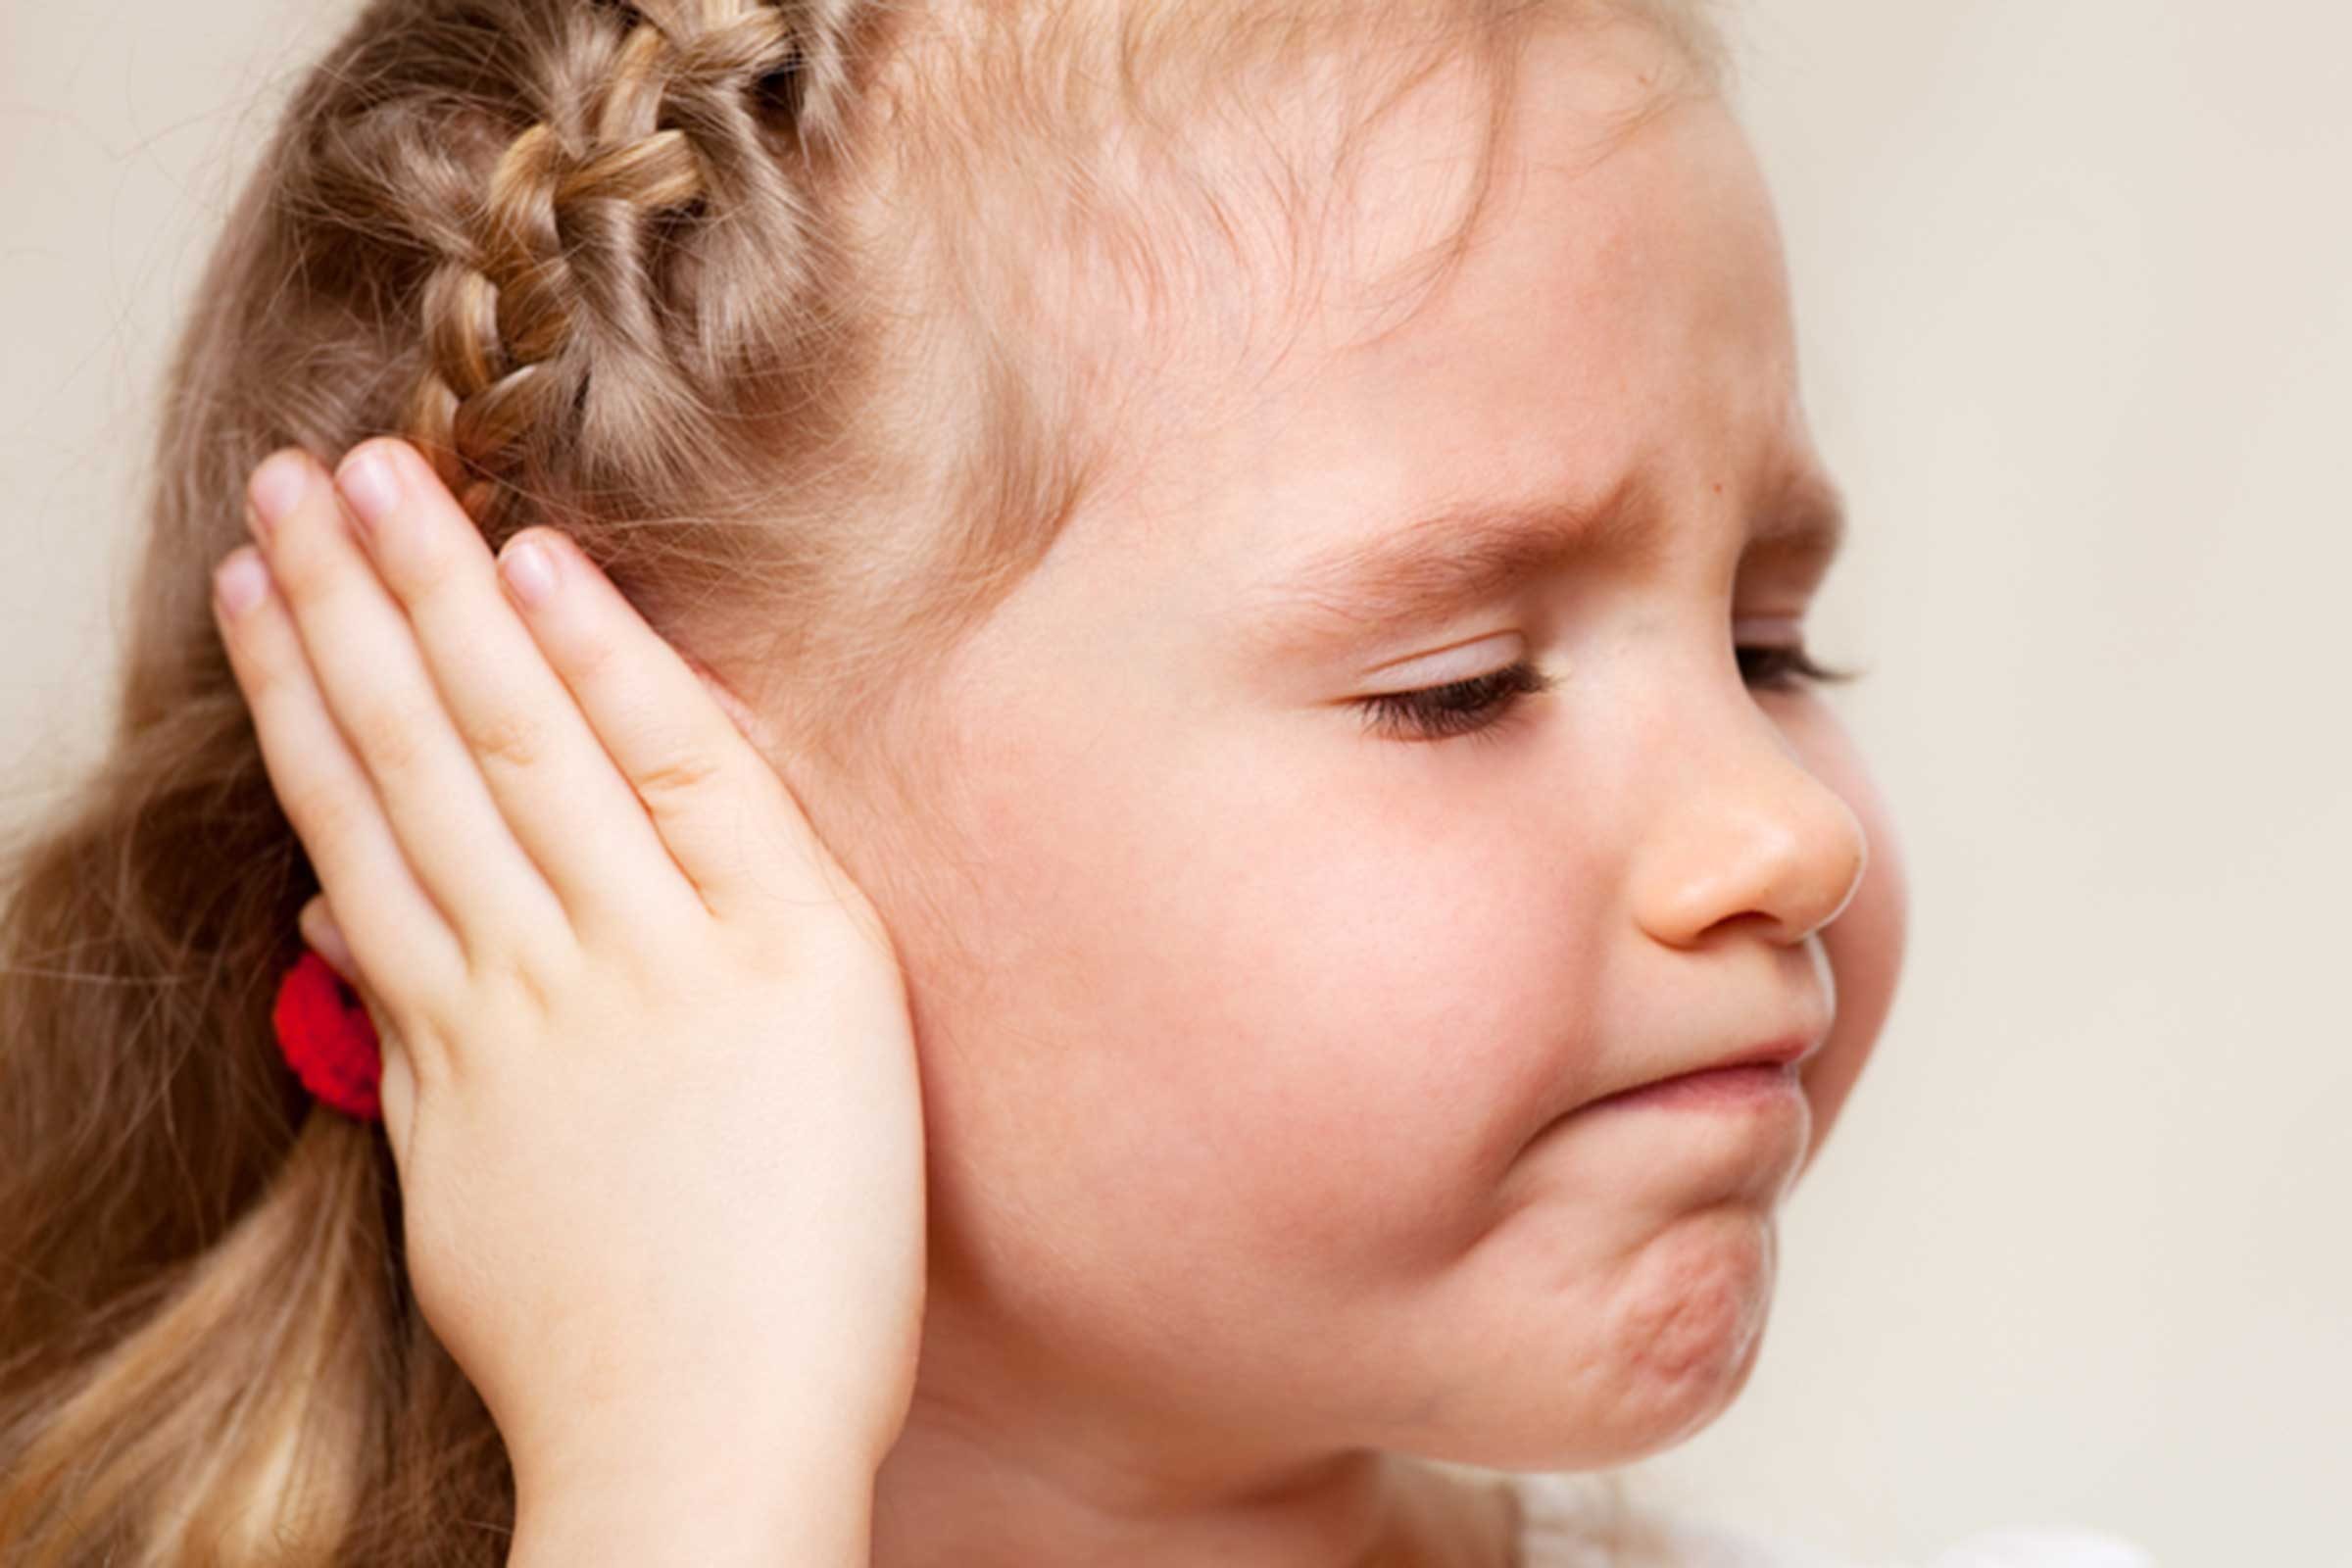 What home remedies can you use for ear pain in adults?